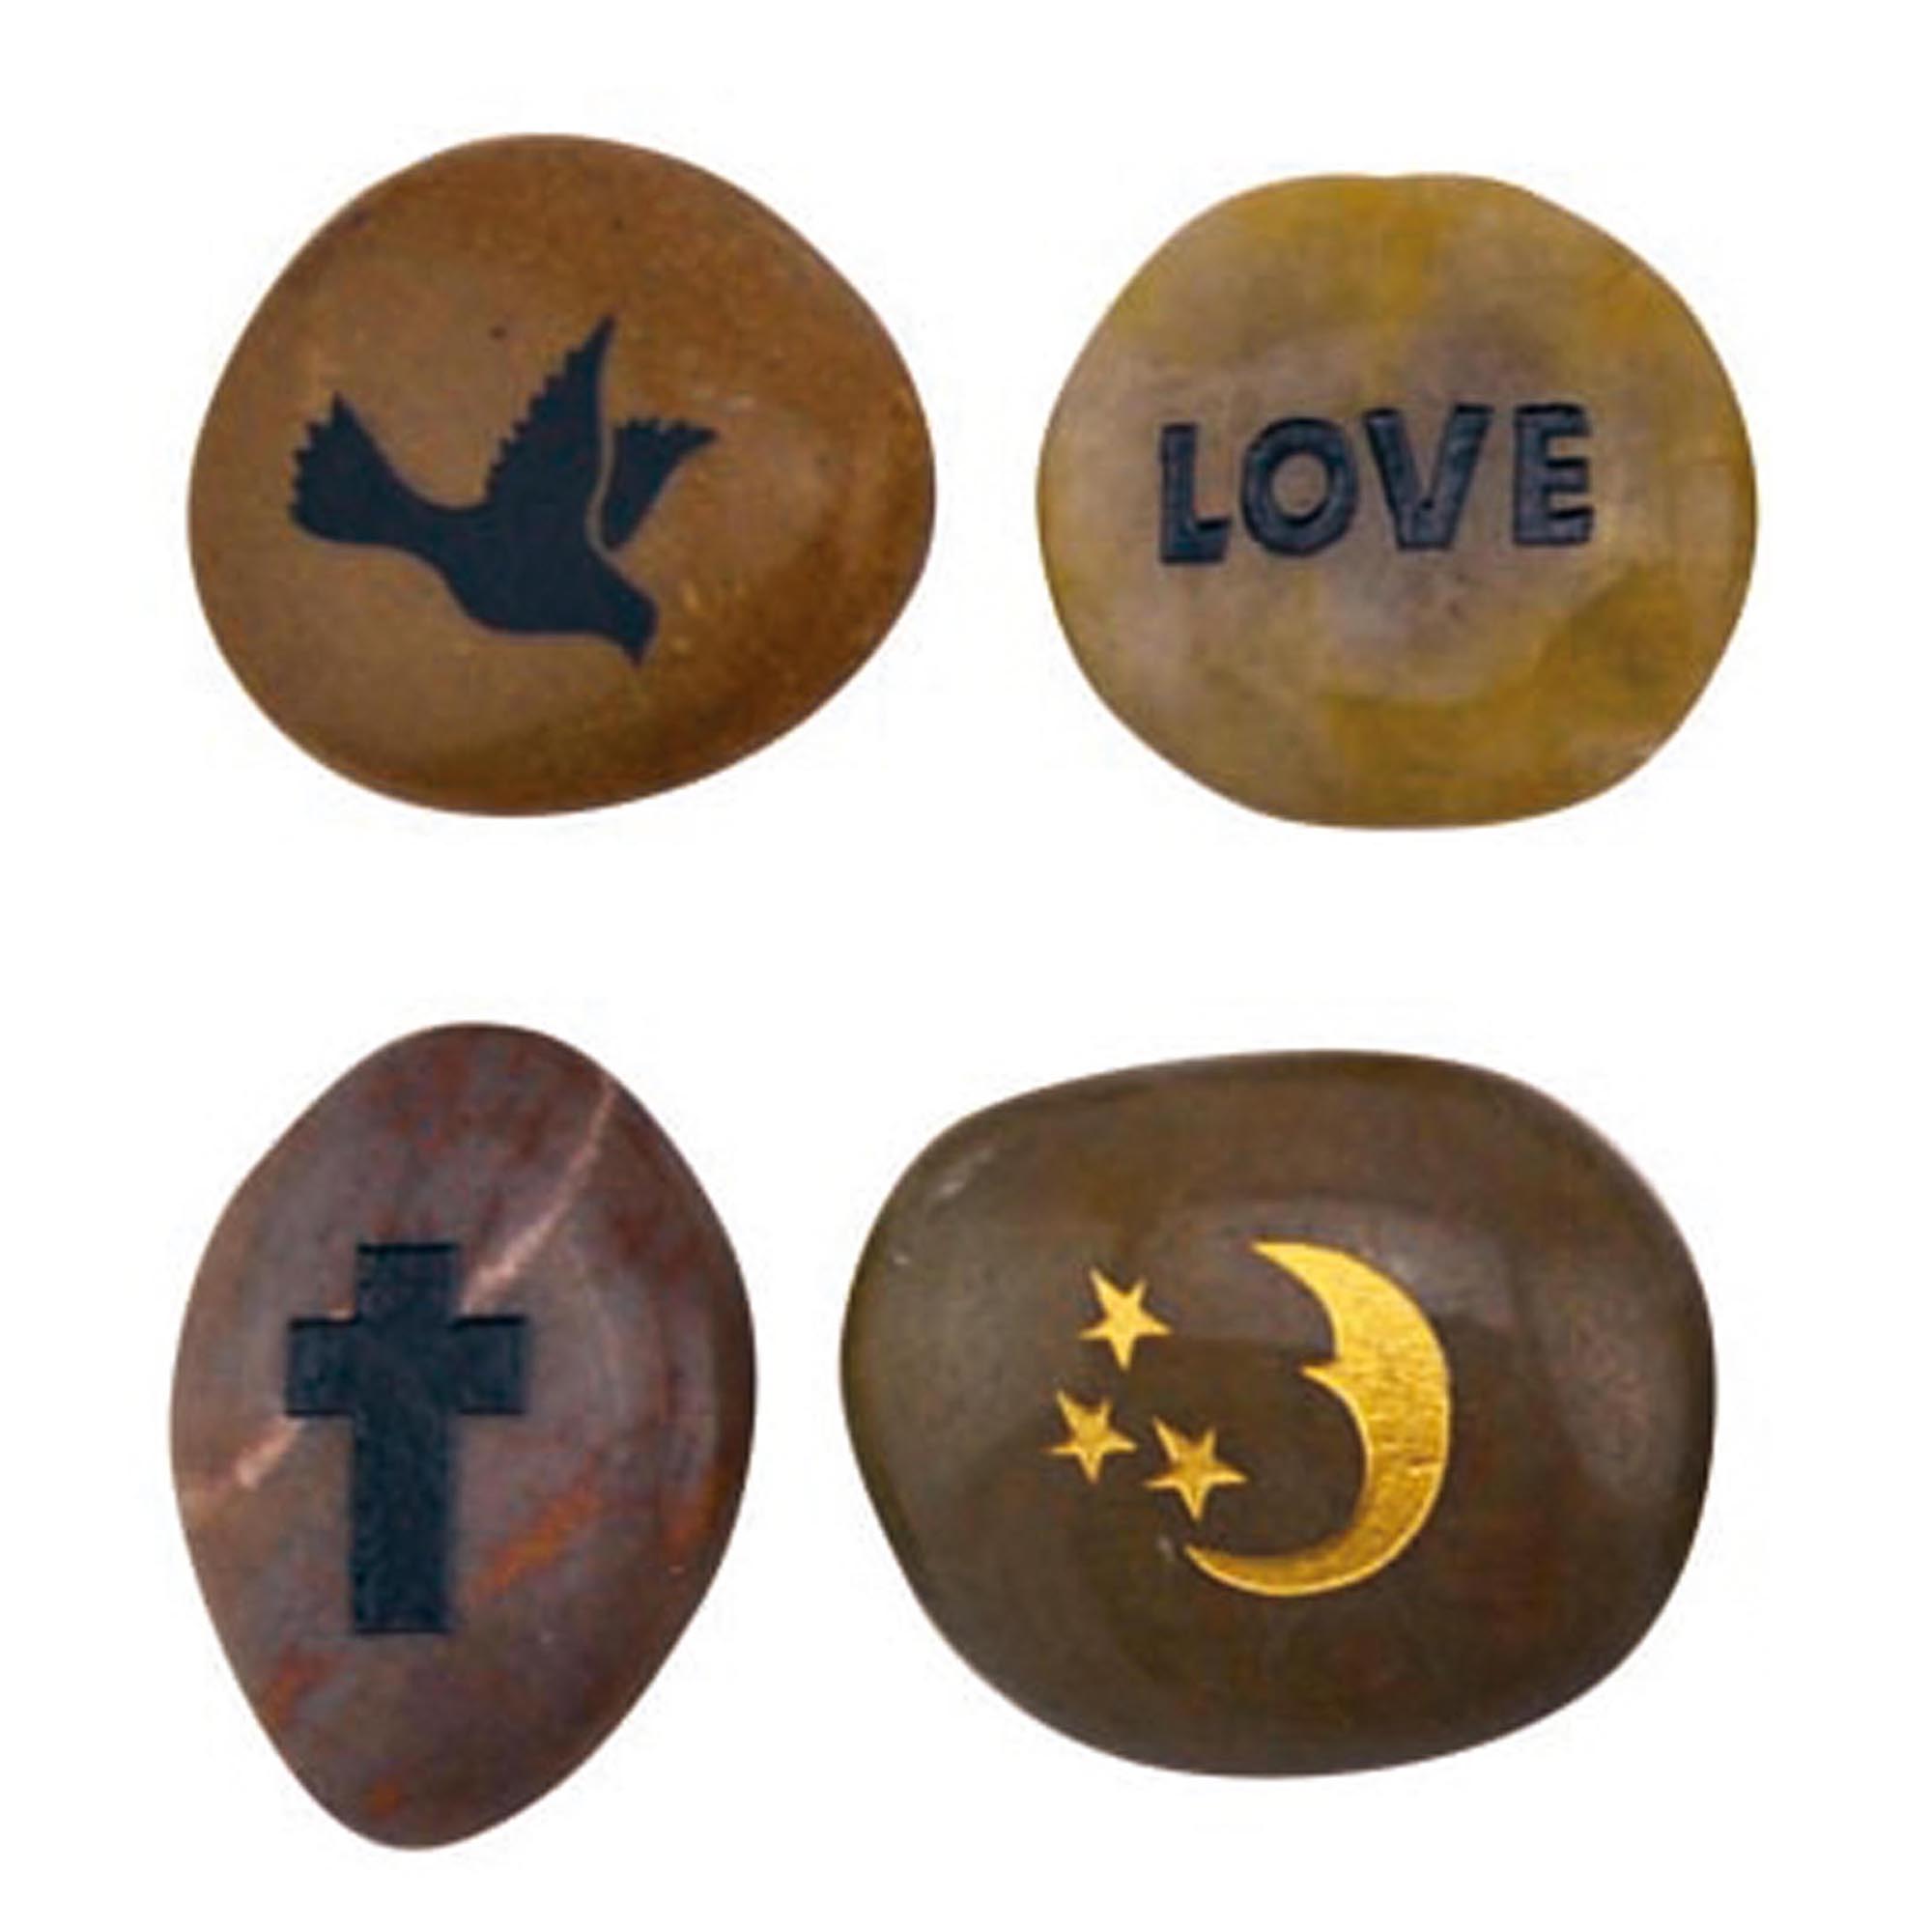 Pebble stone natural pebble with customize engravment words or designs